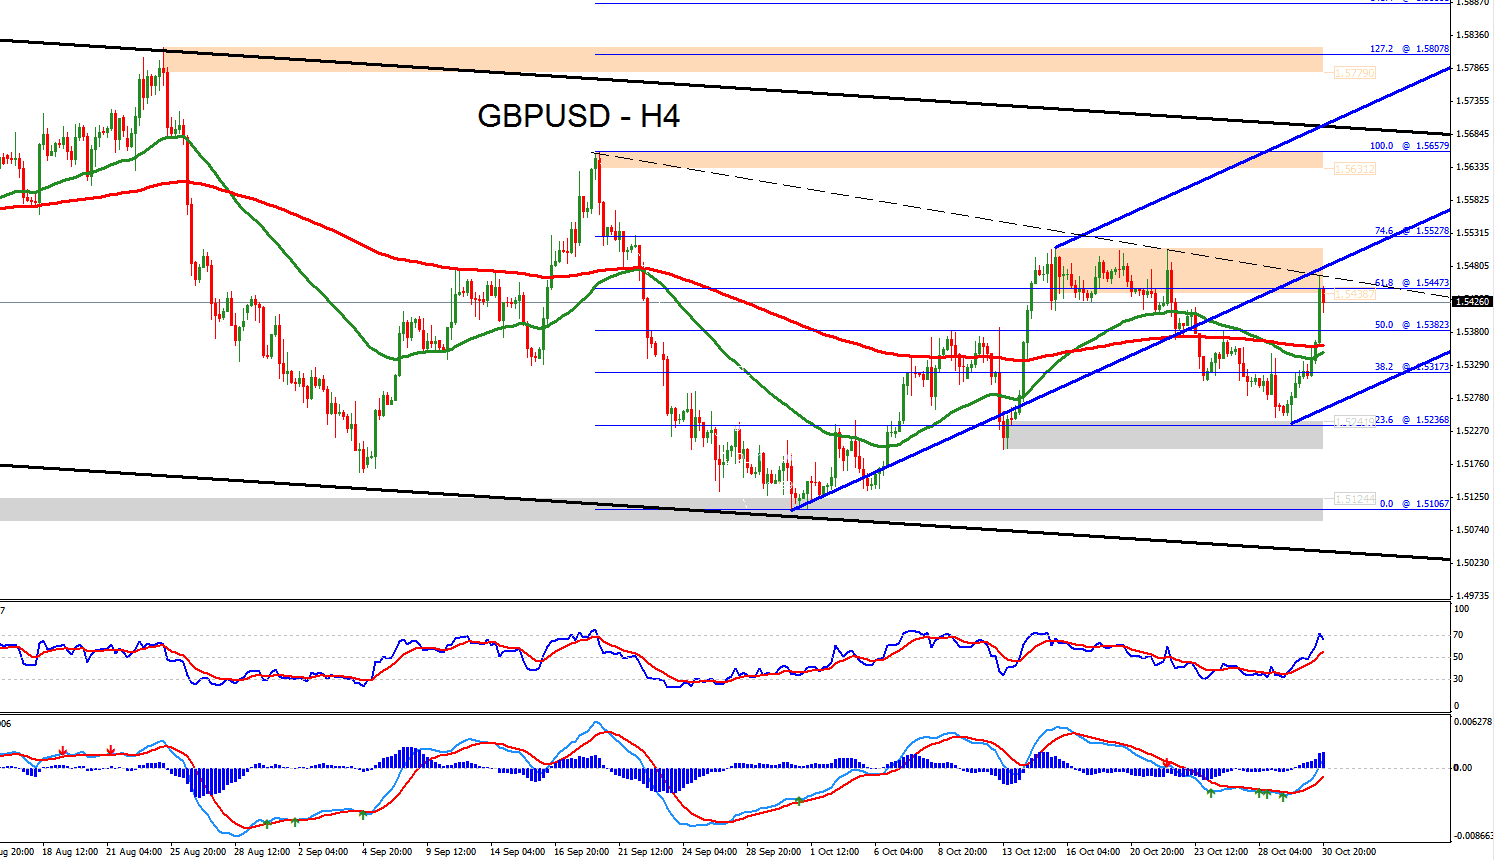 forex technical analysis gbpusd moves above trend line